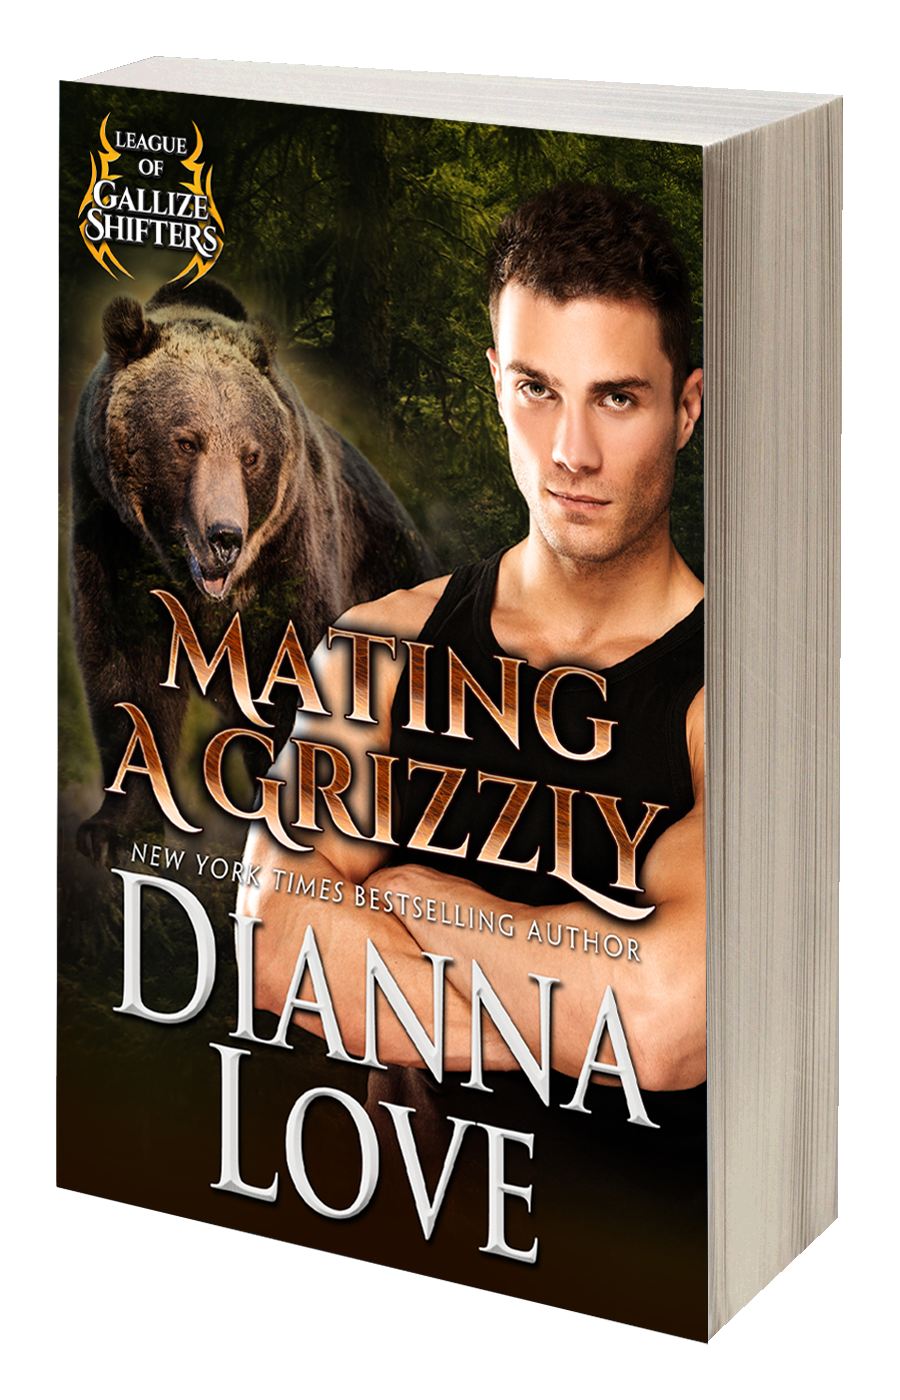 Mating A Grizzly: League Of Gallize Shifters book 2